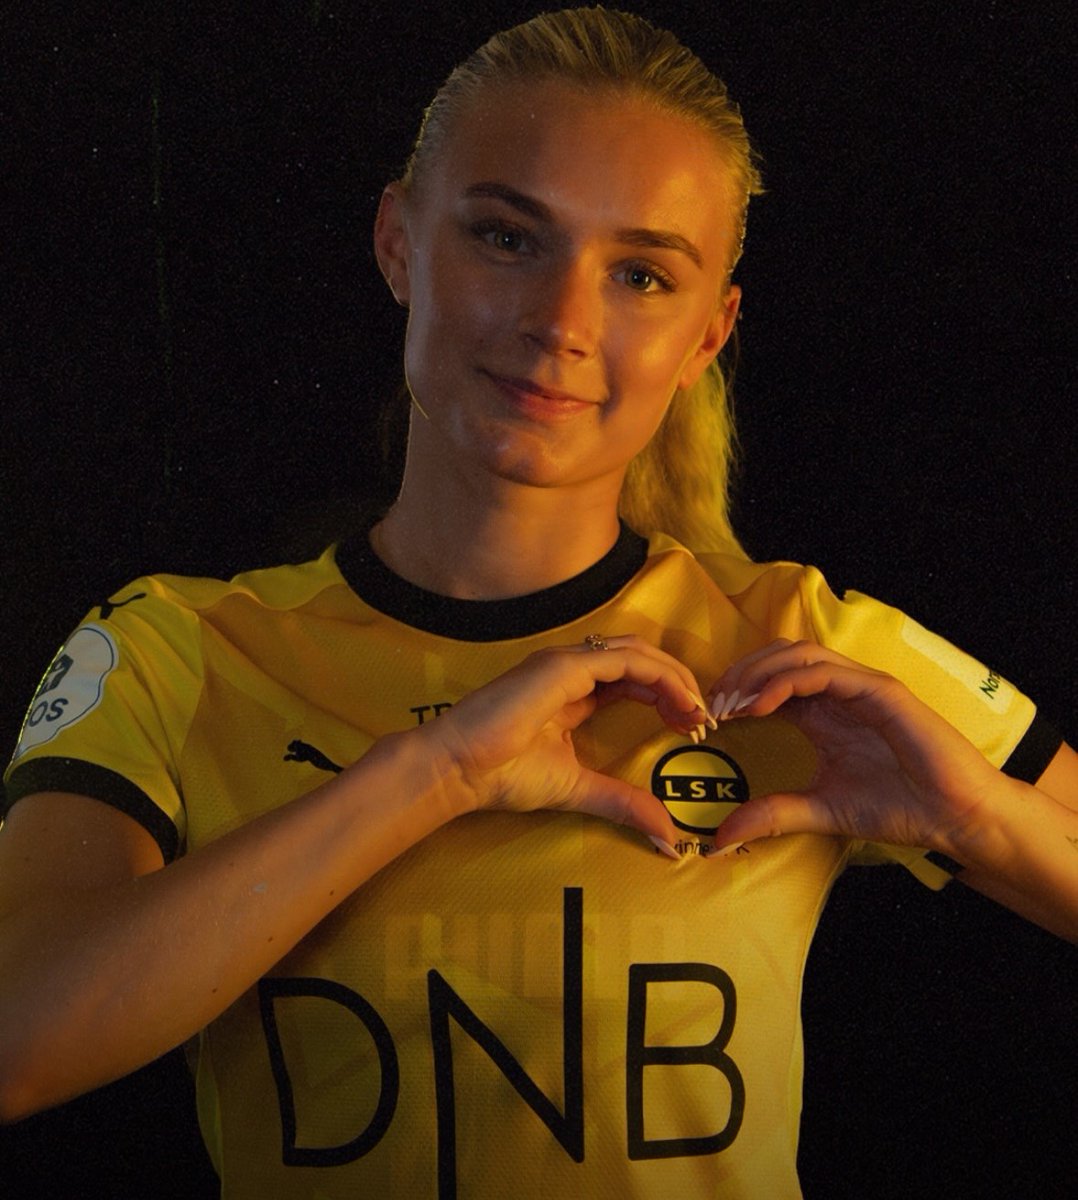 My dear friend Thea scored a fantastic goal yesterday. Unfortunately, she and her girls still lost the game. Two hearts were beating in my chest, one for Thea and Lilleström and the other for my hometown Trondheim. I would have preferred a draw, but Rosenborg deserved to win.💛🖤